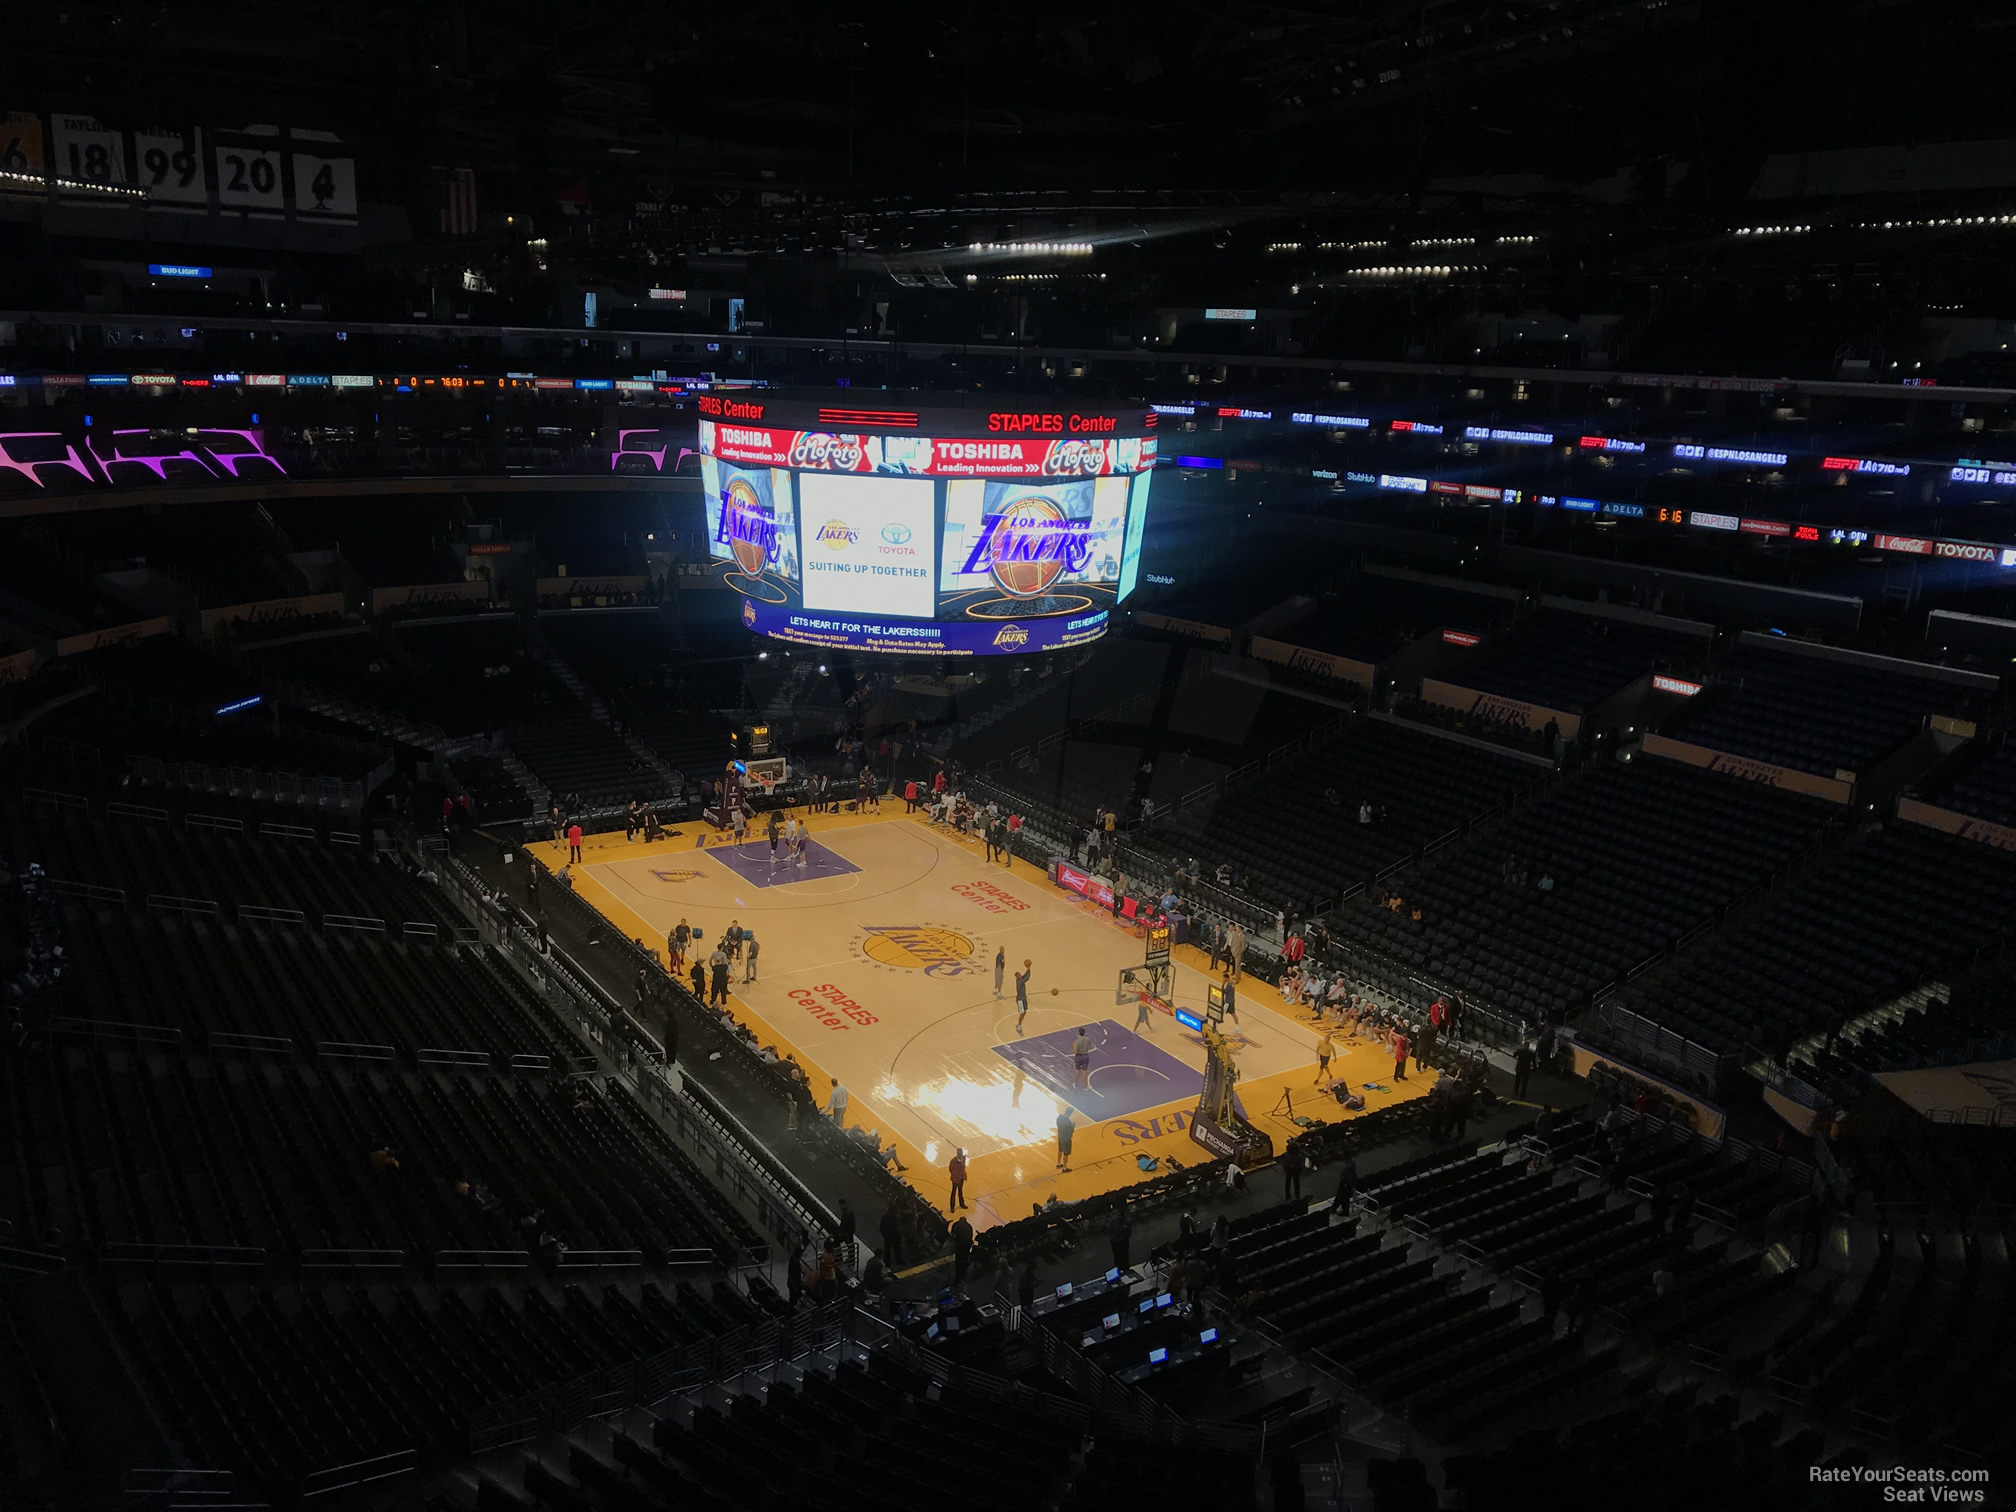 Staples Center Section 313 - Clippers/Lakers - RateYourSeats.com